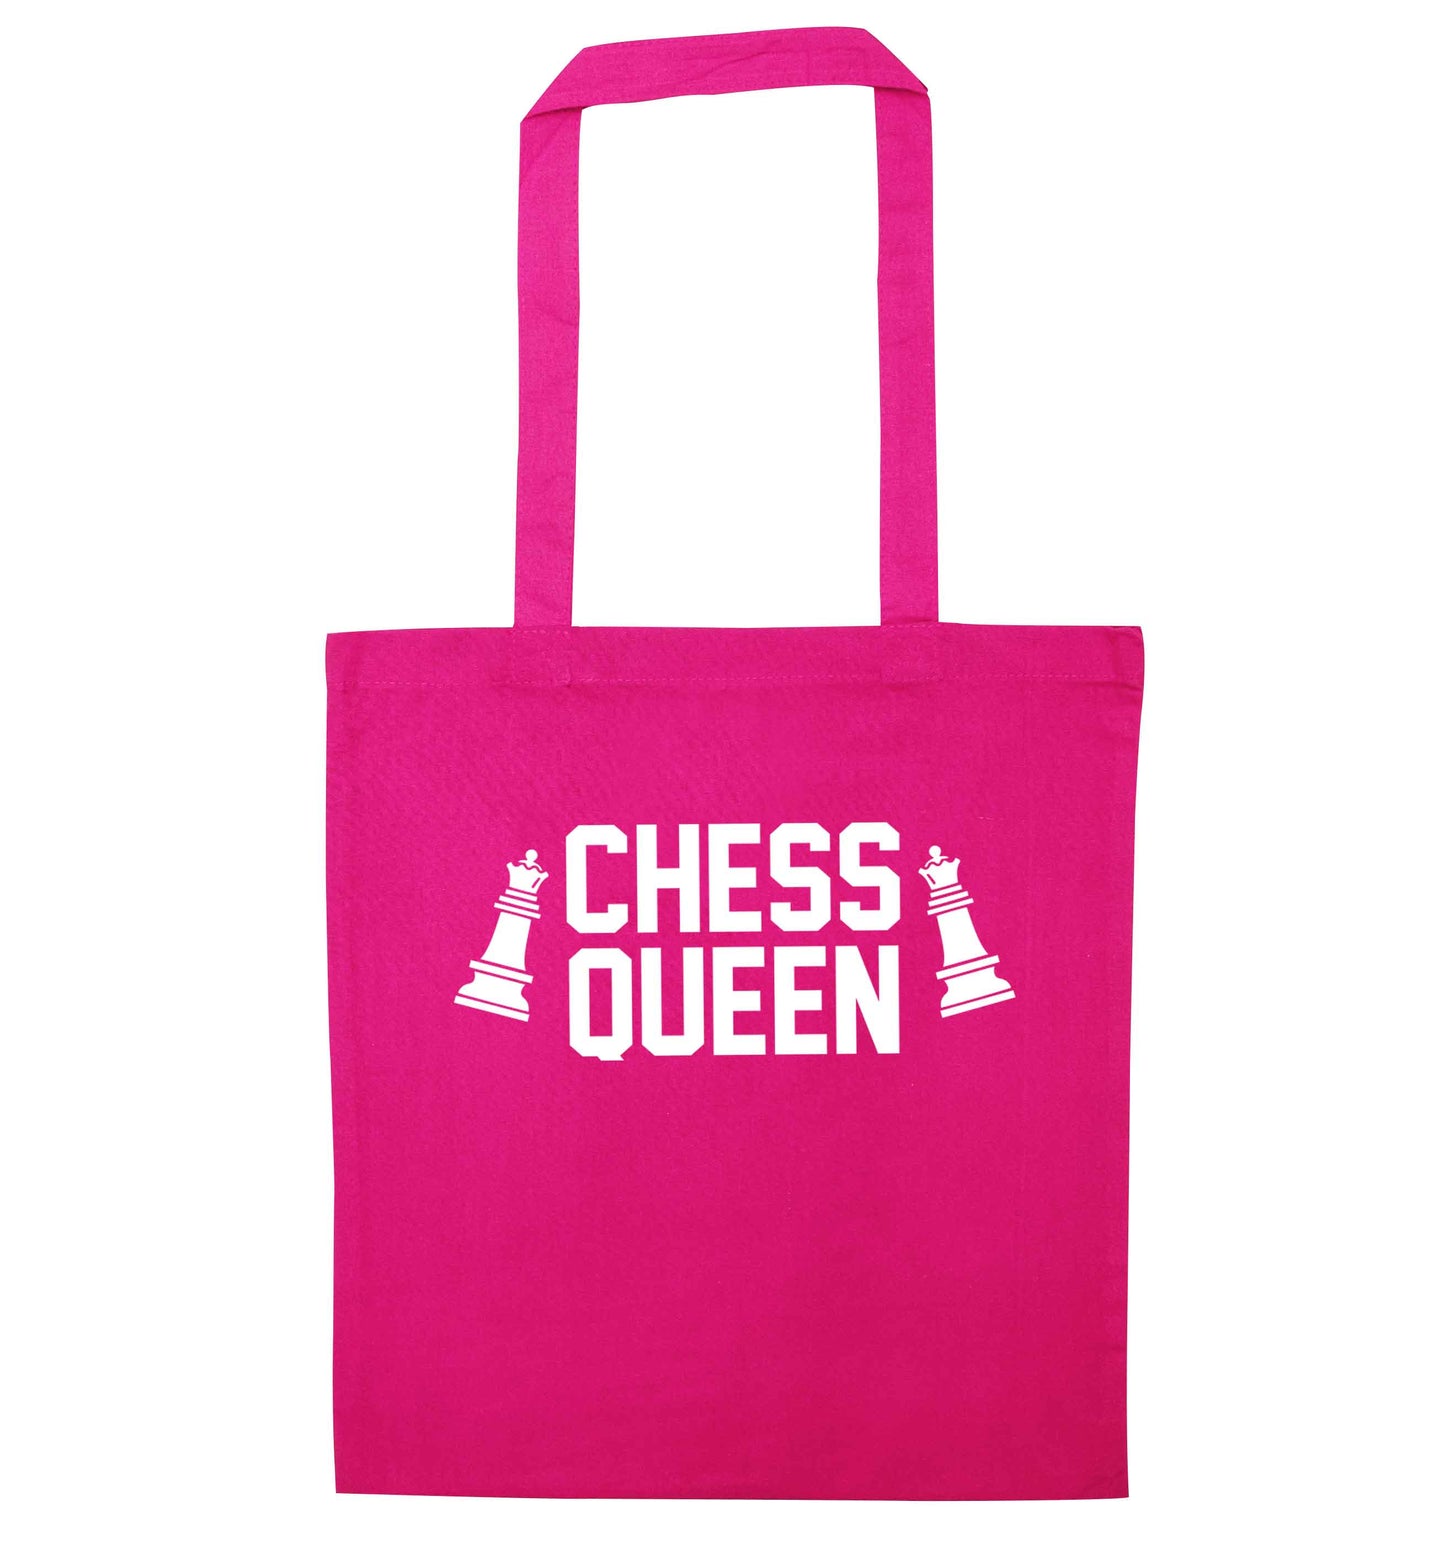 Chess queen pink tote bag